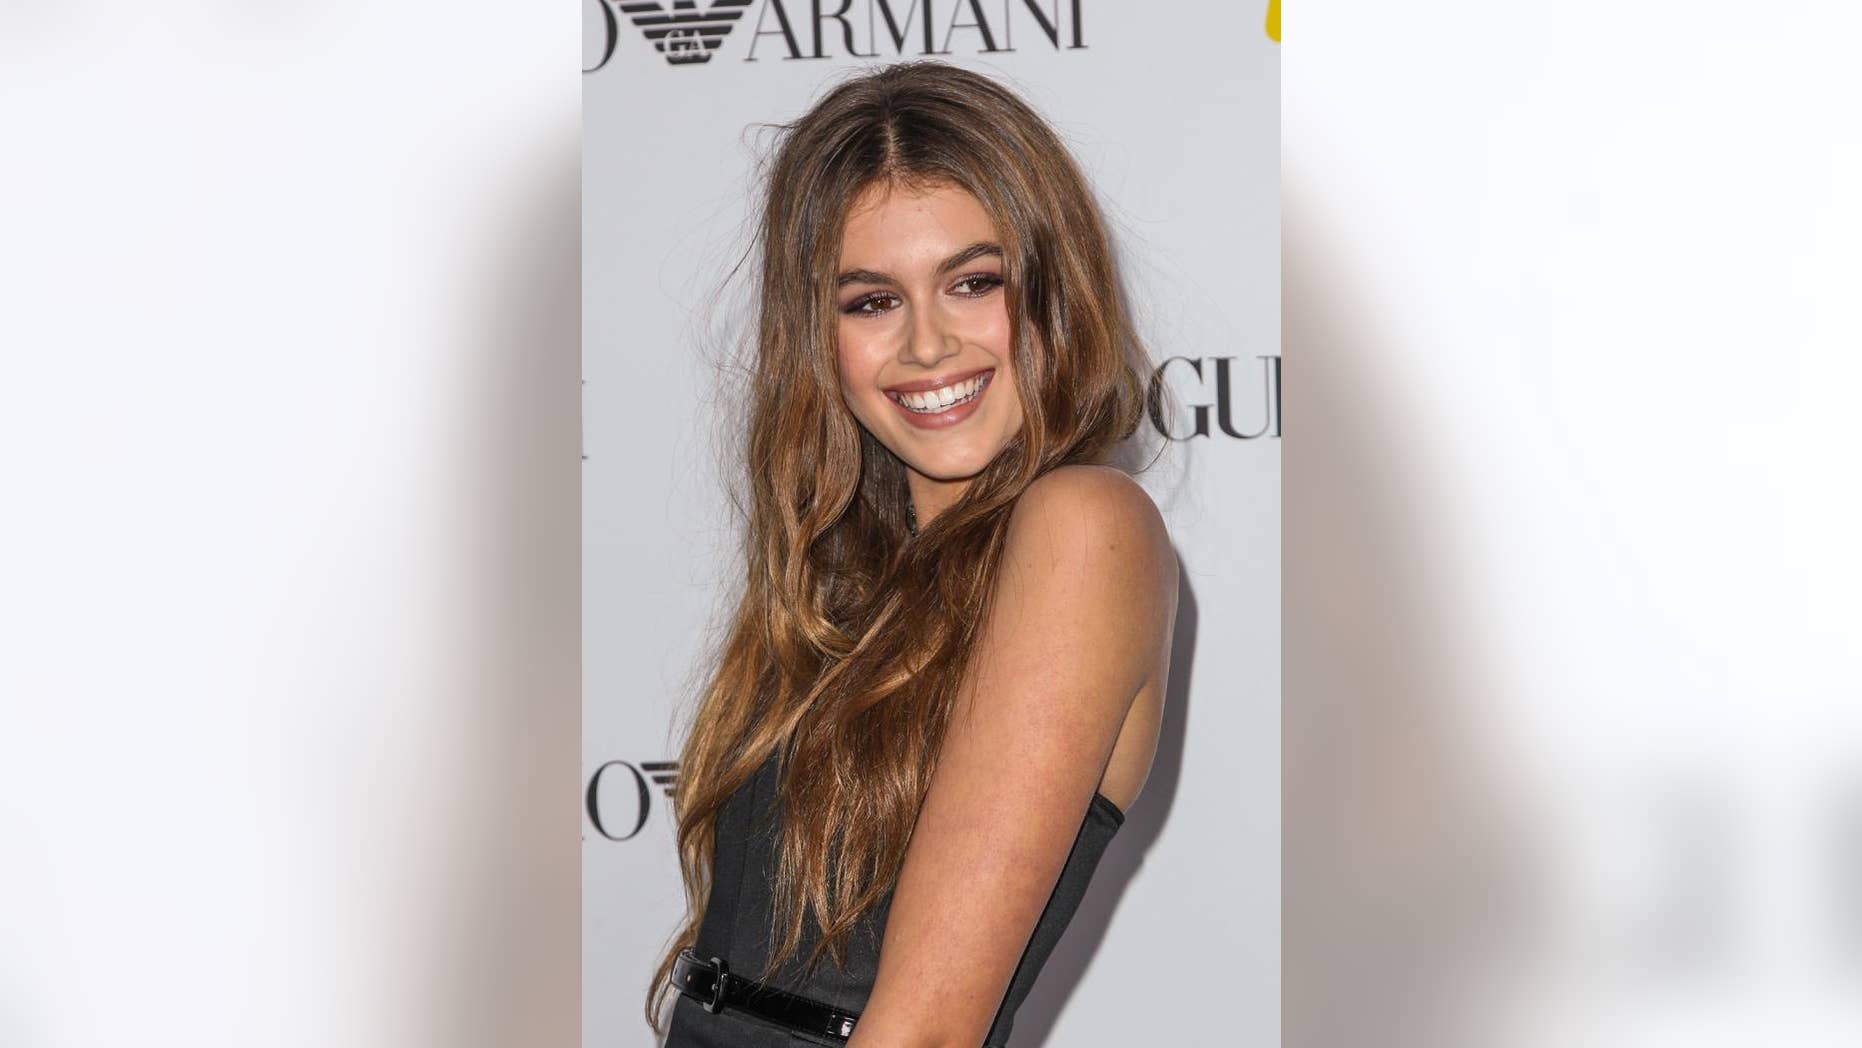 Cindy Crawfords Daughter Kaia Gerber Looks Exactly Like Her